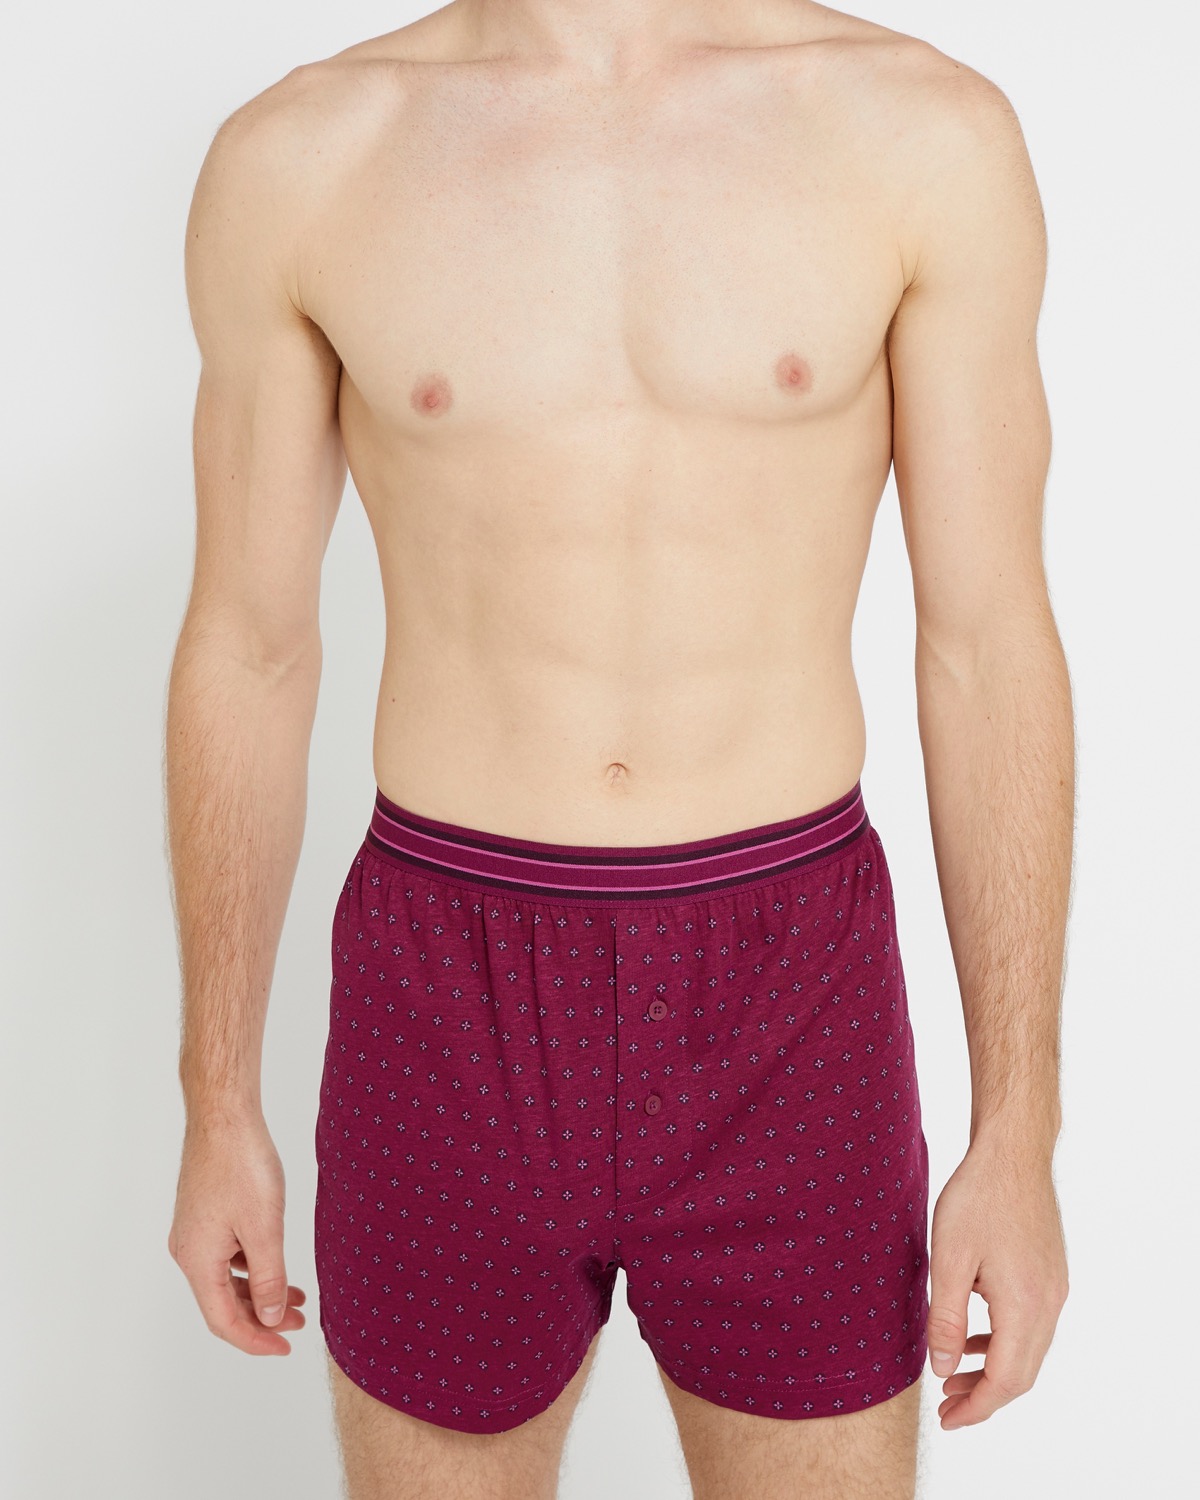 Comfortable loose fit boxers for men